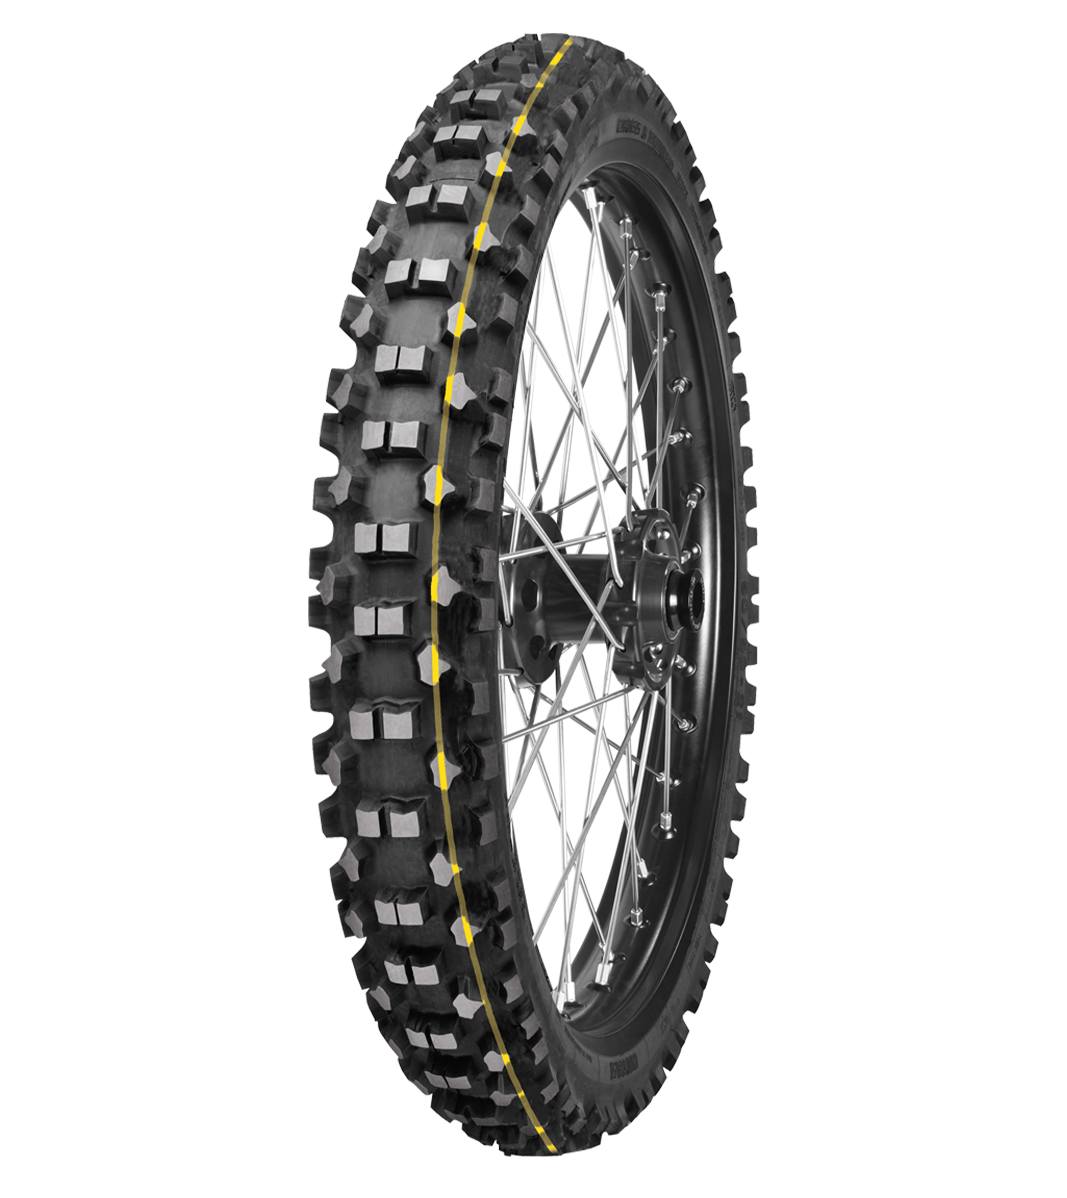 Mitas C-21 STONE KING 90/90-14 Enduro Competition Off-Road SUPER 40M Yellow Tube Front Tire, 226072, 90/90-14, C-21 Stone King, Enduro, Enduro Competition, Front, Off-Road, Tires - Imported and distributed in North & South America by Lindeco Genuine Powersports - Premier Powersports Equipment and Accessories for Motorcycle Enthusiasts, Professional Riders and Dealers.